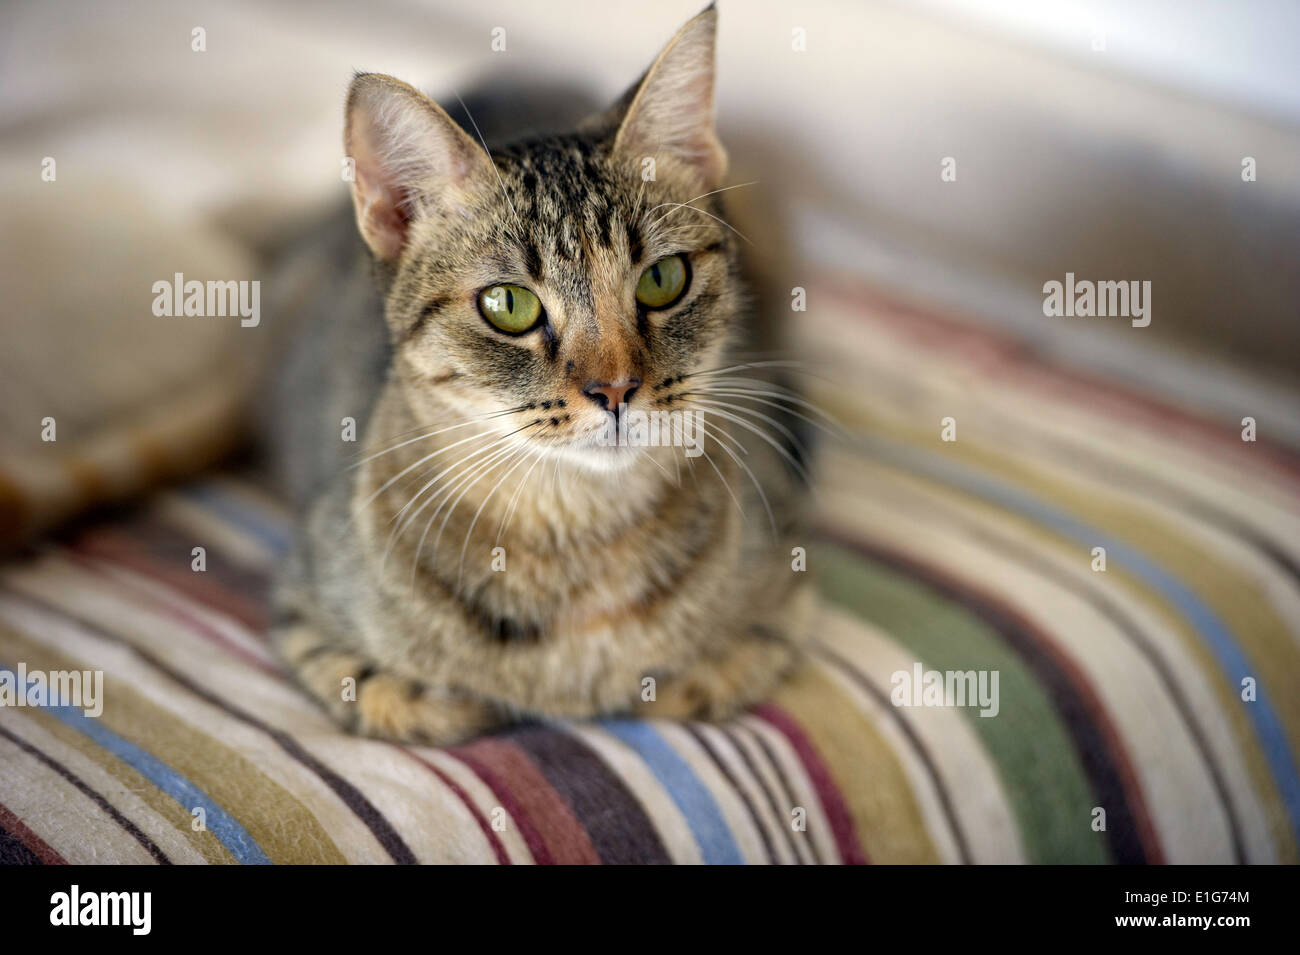 This Tabby cat is resting on a comfortable colorful blanket. Stock Photo